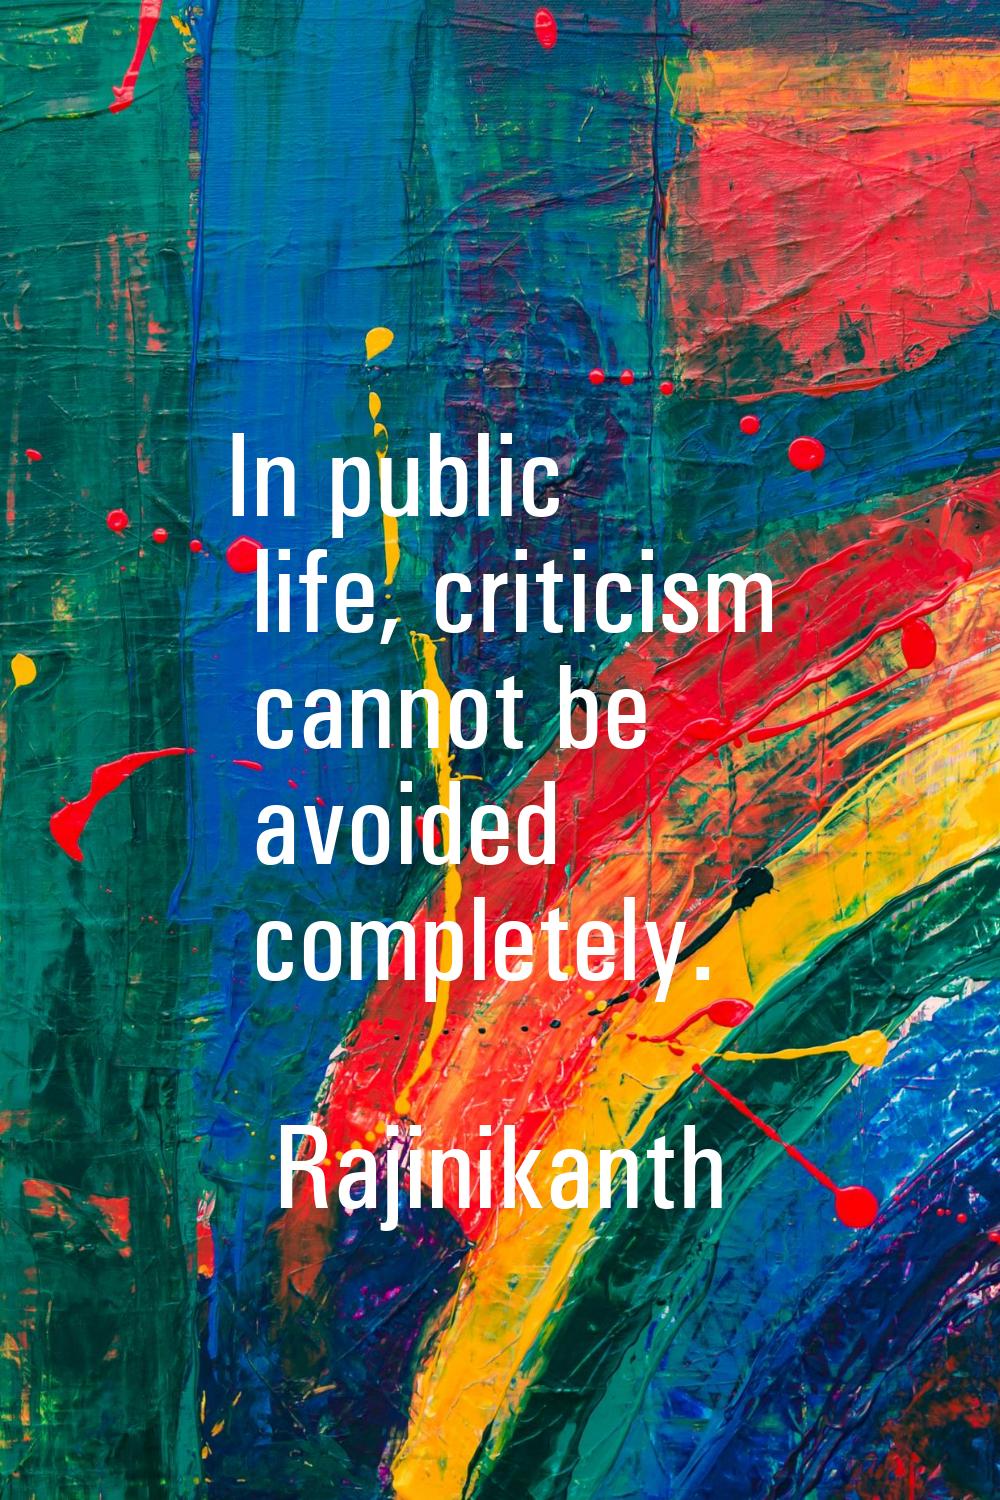 In public life, criticism cannot be avoided completely.